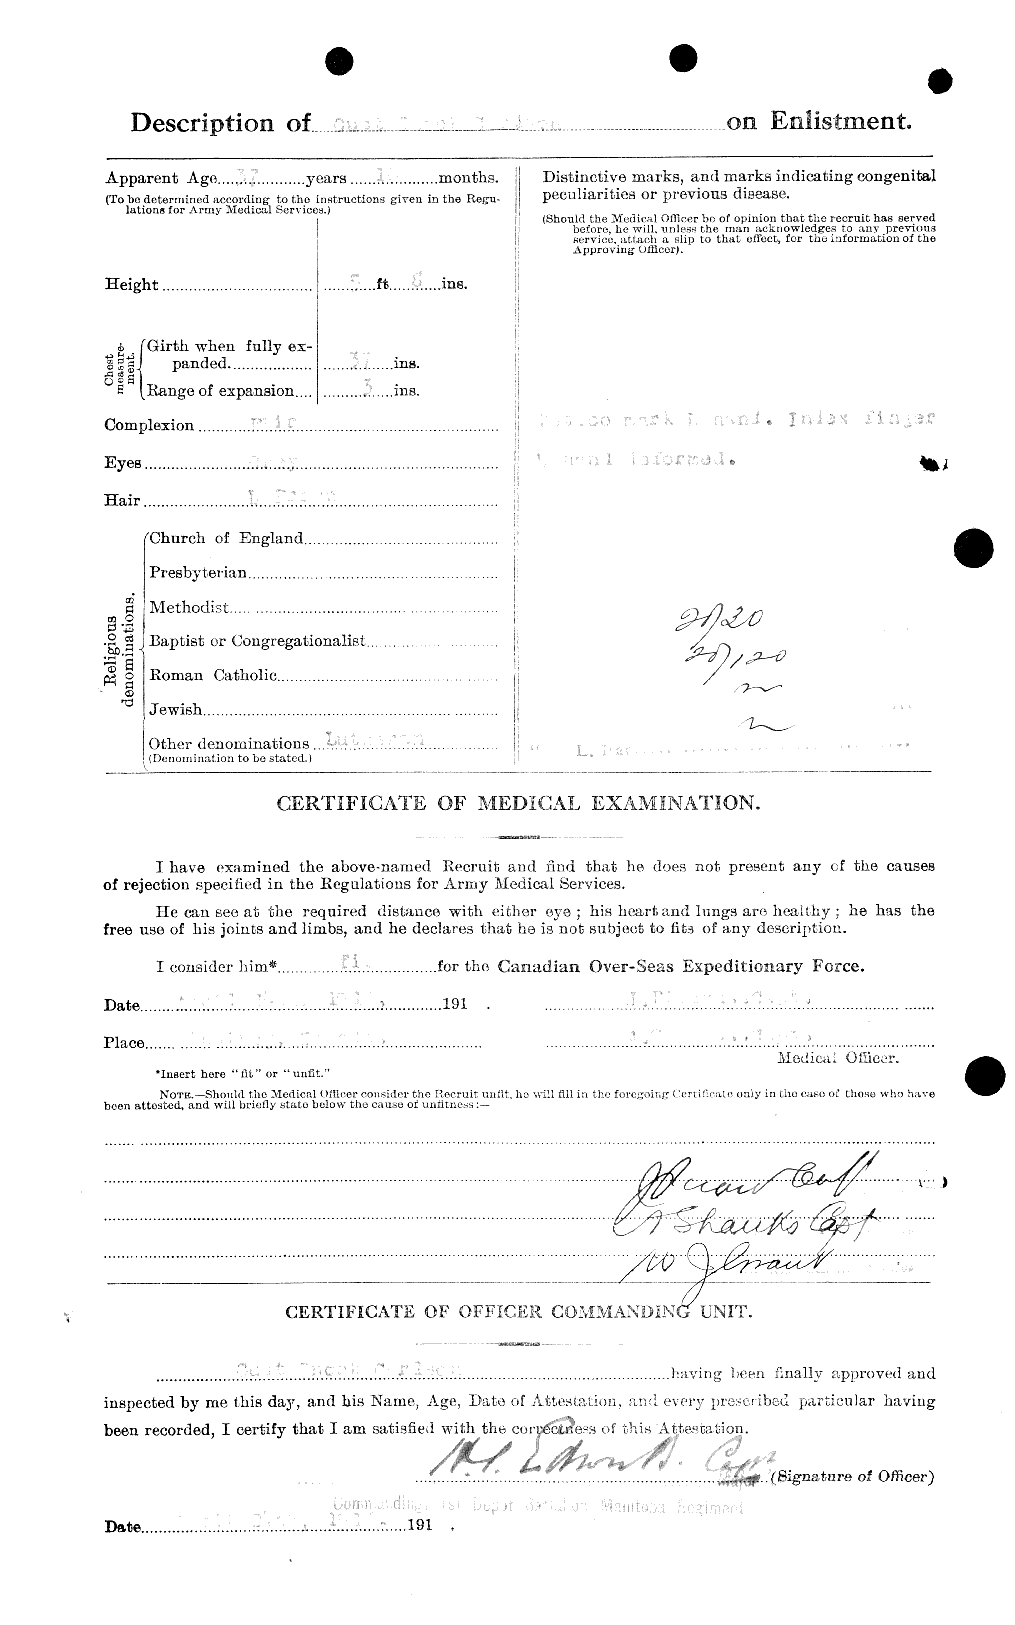 Personnel Records of the First World War - CEF 004548b